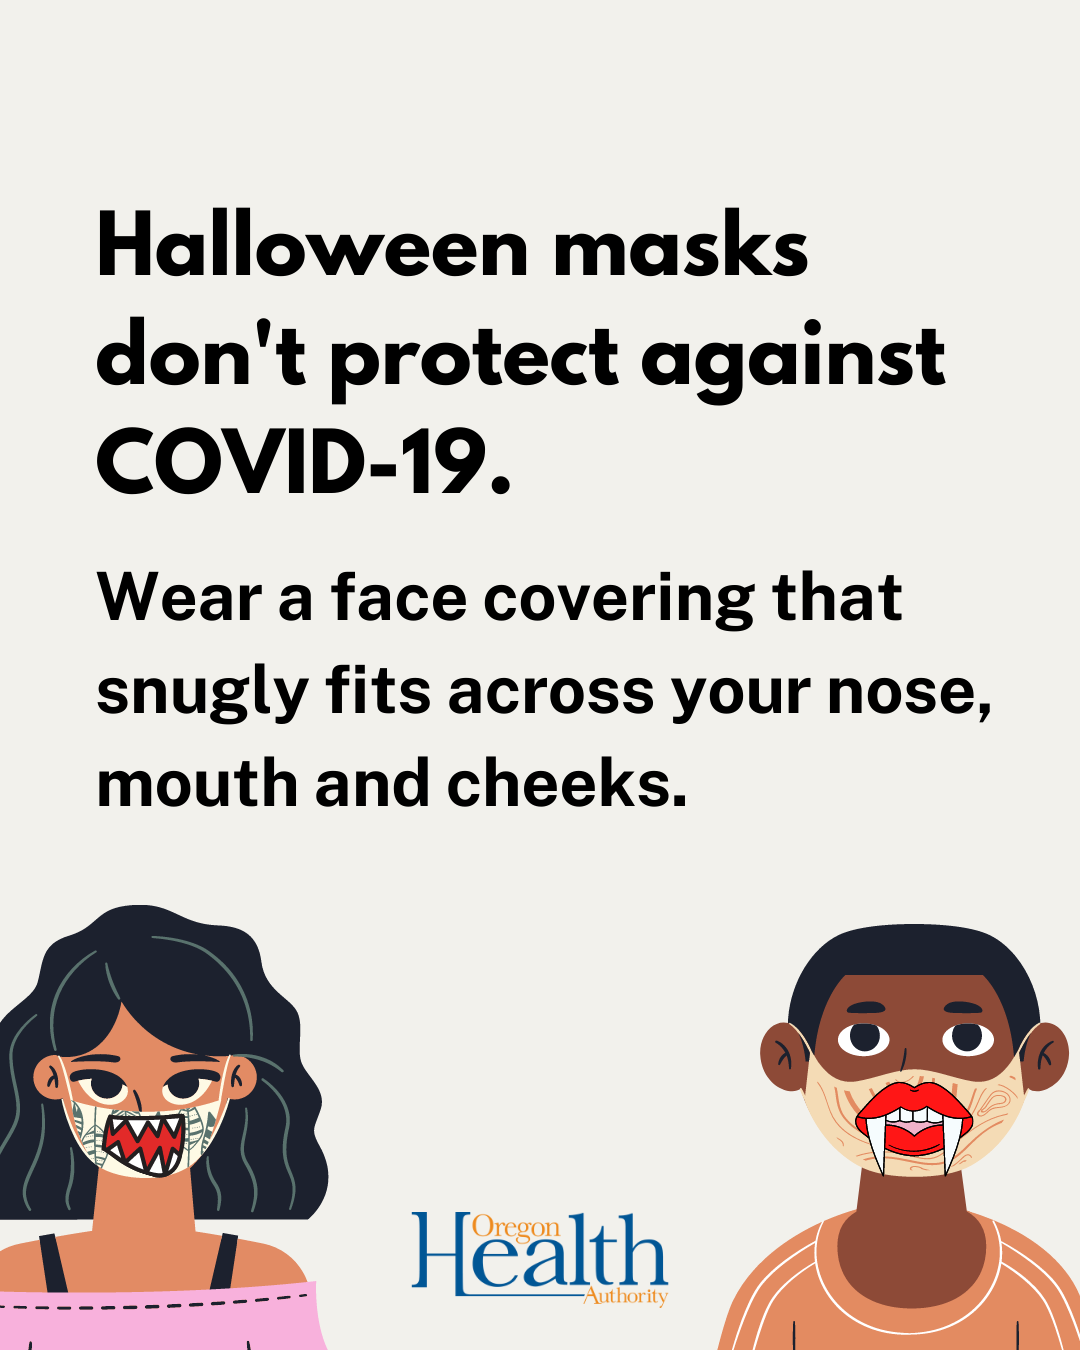 Infographic says, “Halloween masks don’t protect against COVID-19.”